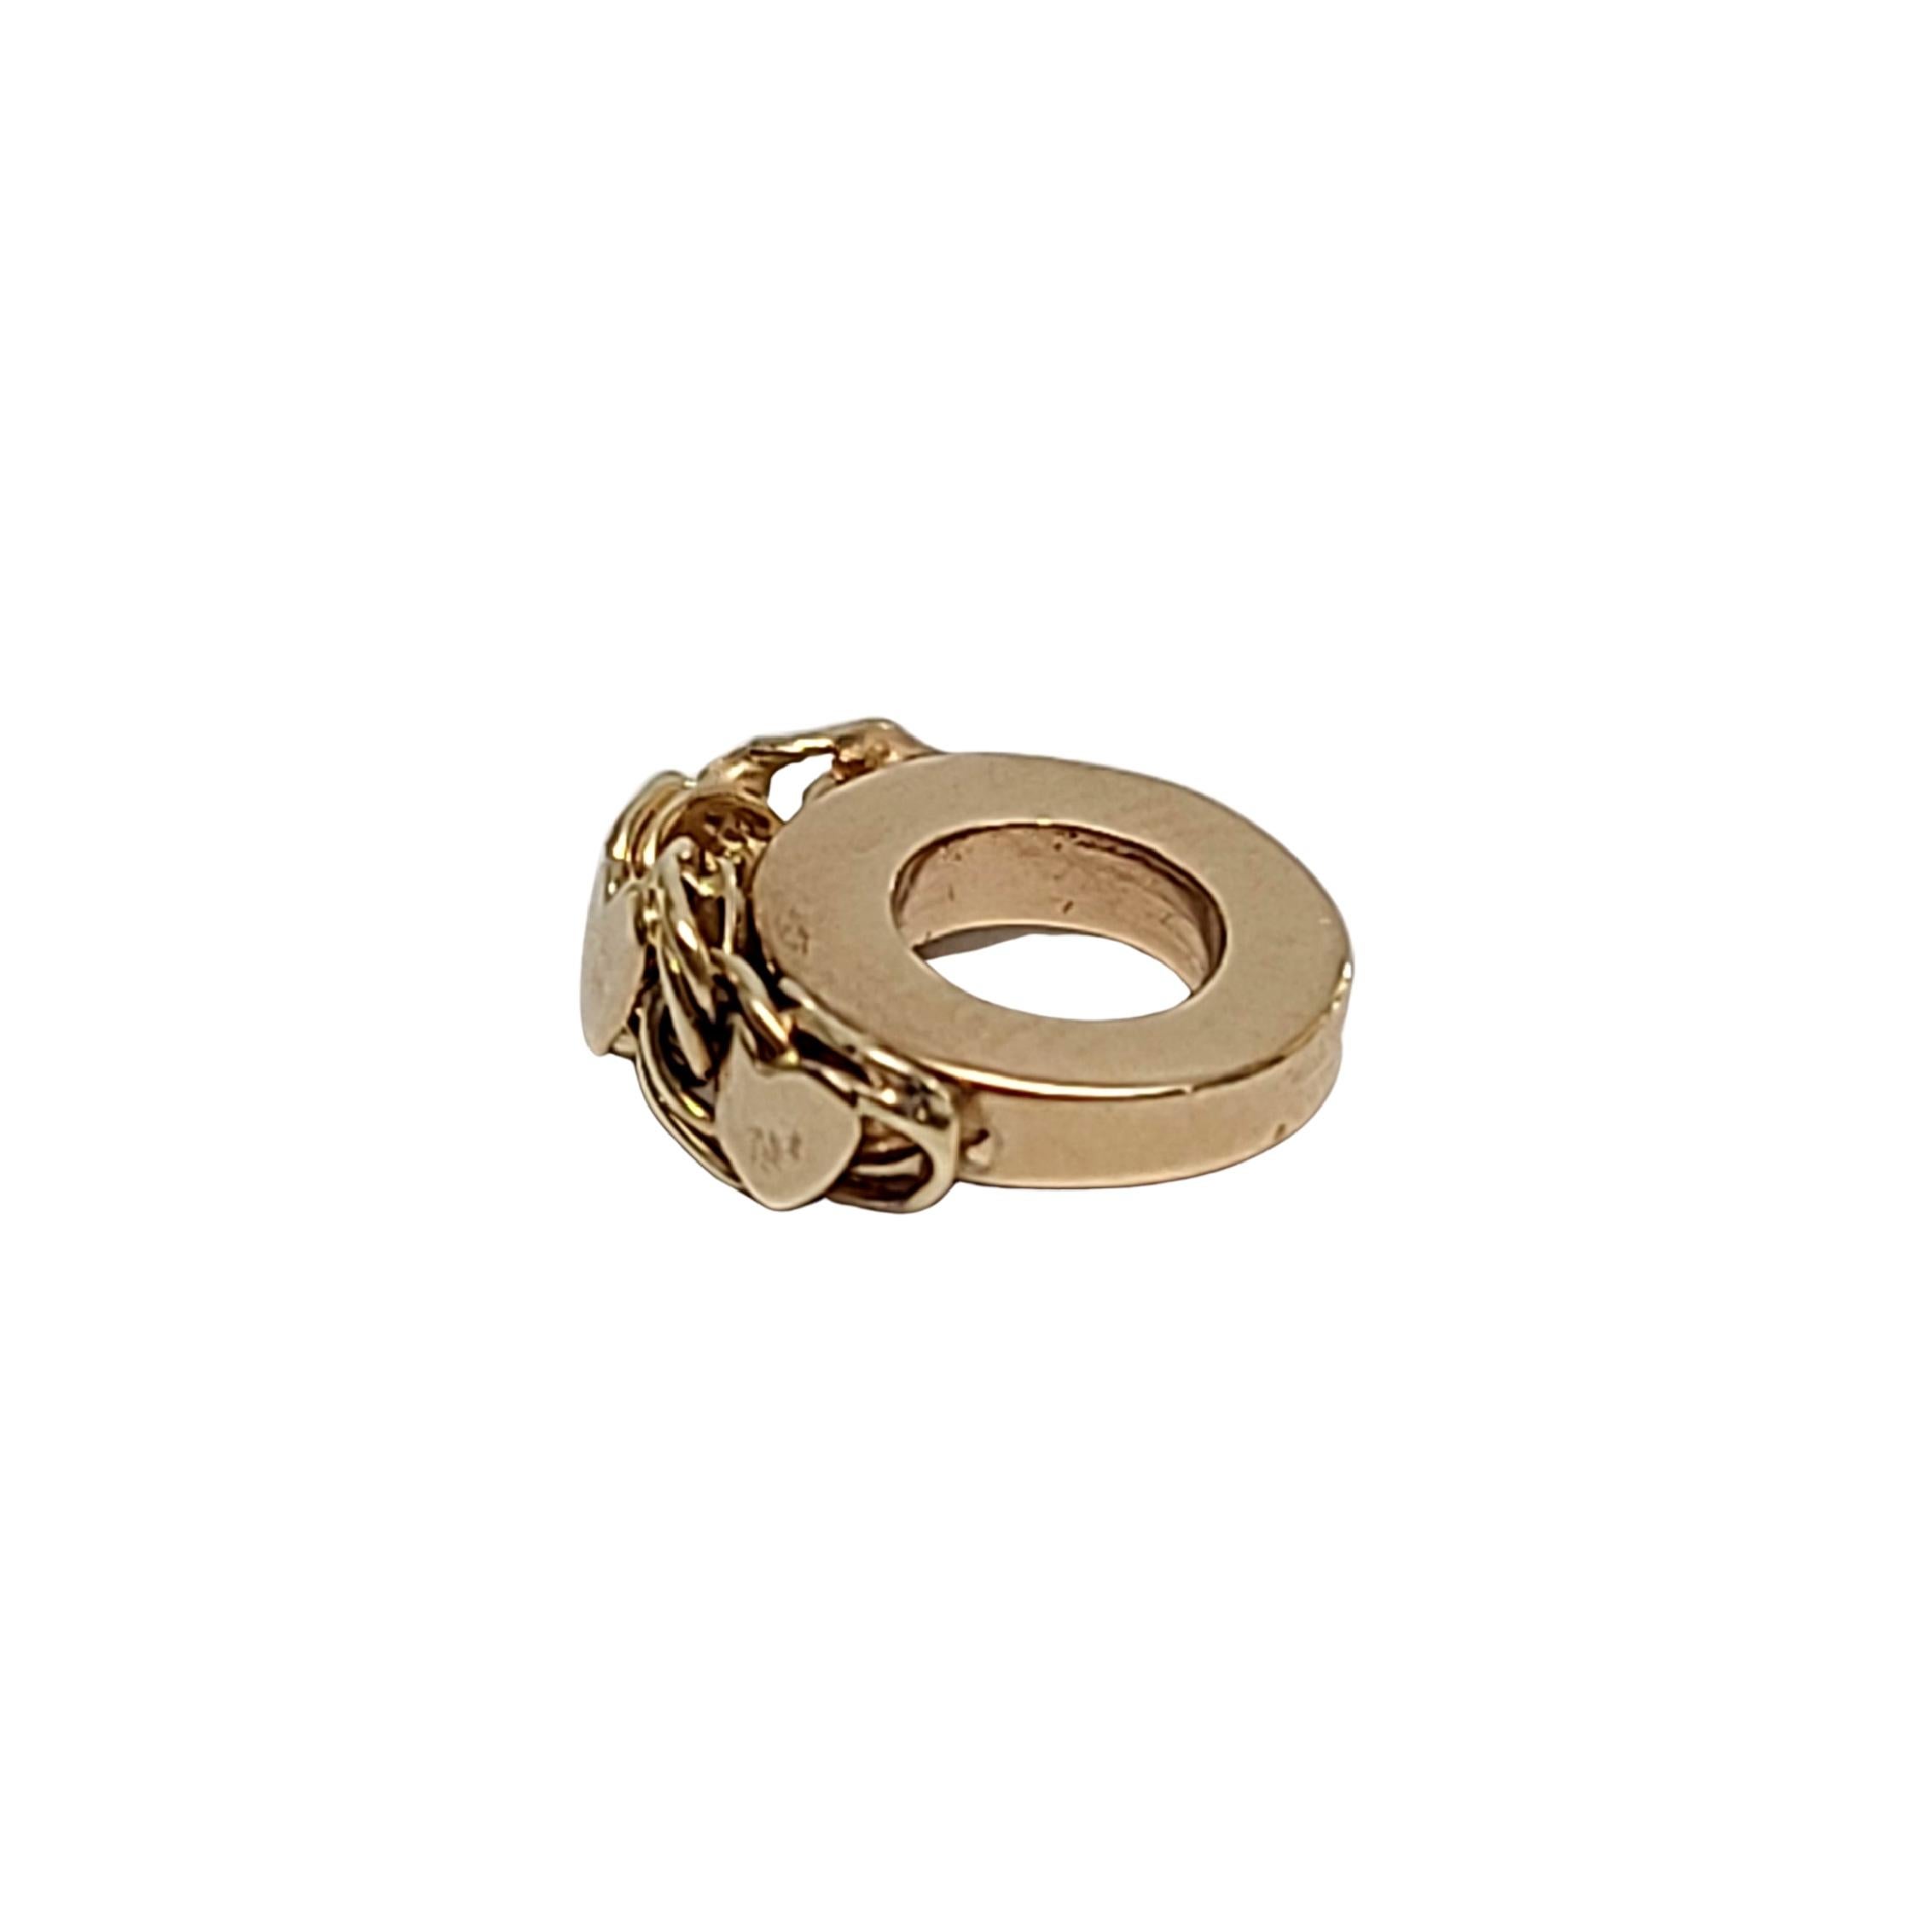 Pandora 14K yellow gold spacer charm.

This lovely Pandora spacer charm features small hearts on a chain set in 14K yellow gold.

Weighs approx .9dwt, 1.4g

Marked 585 ALE

Very good condition, professionally polished.

Will come packaged in a gift